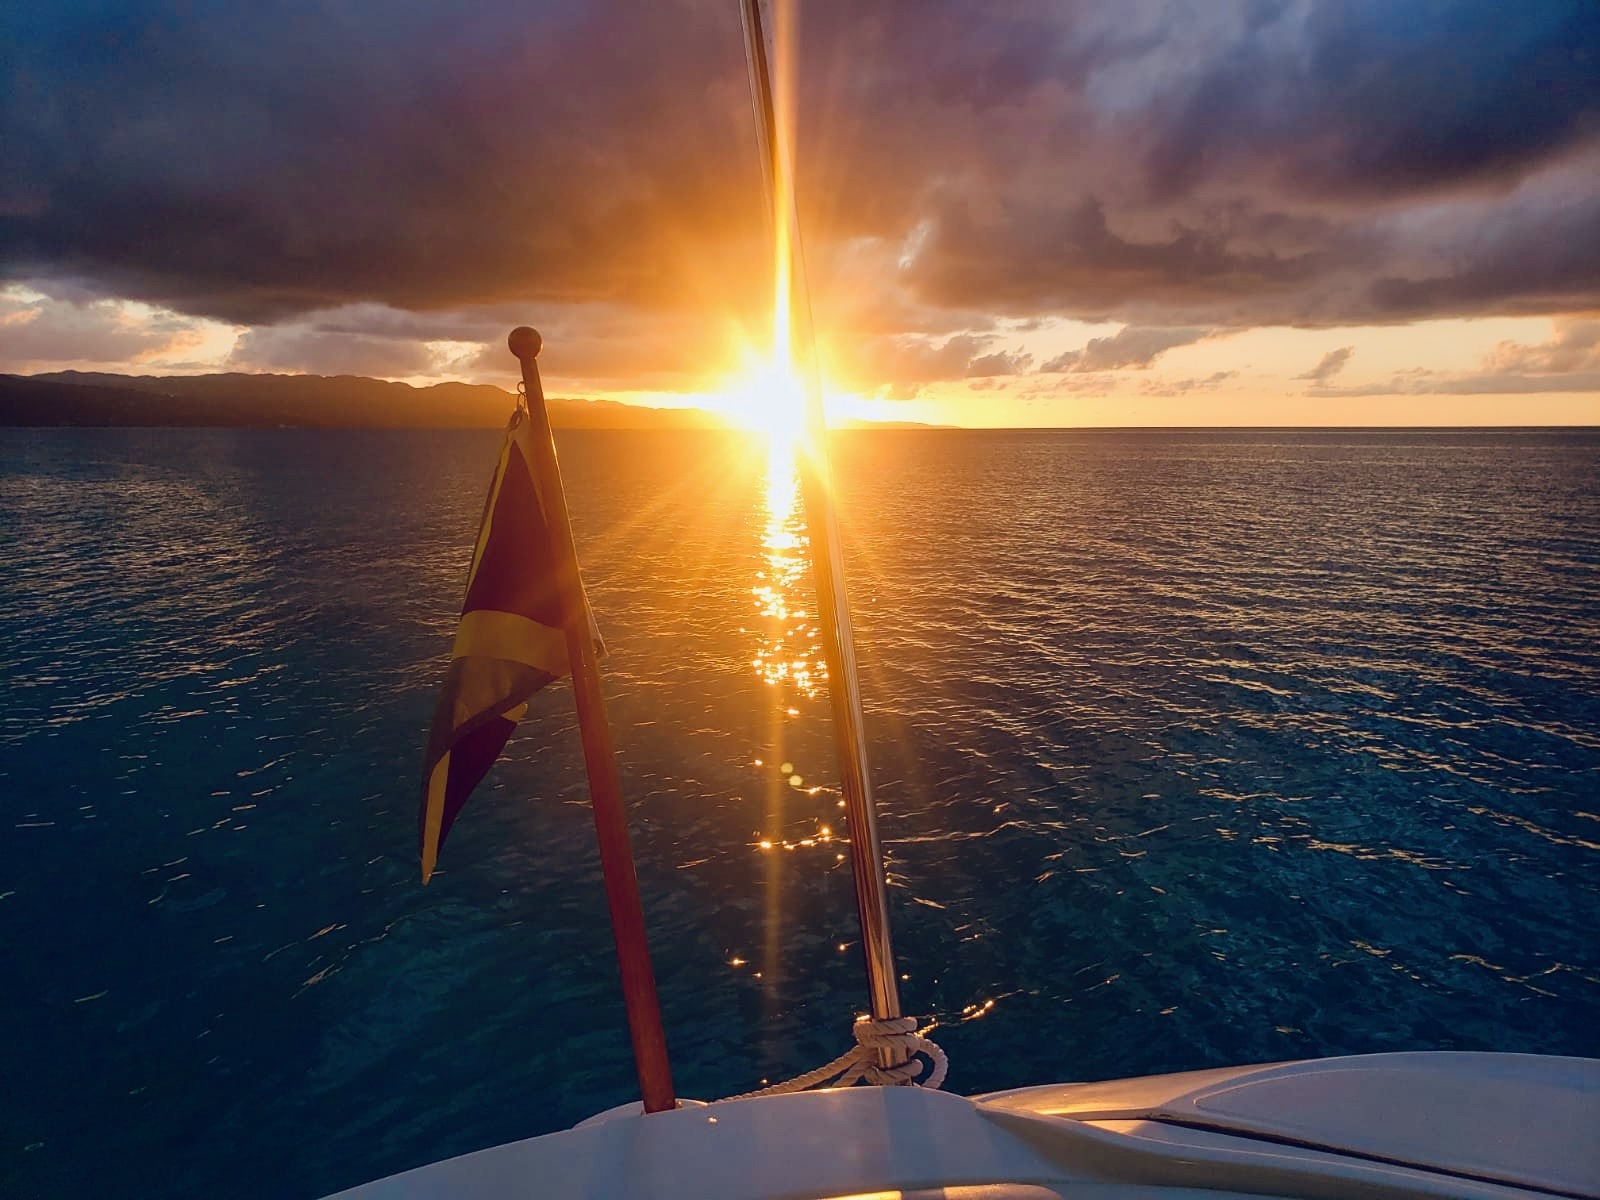 Sunset view from the yacht